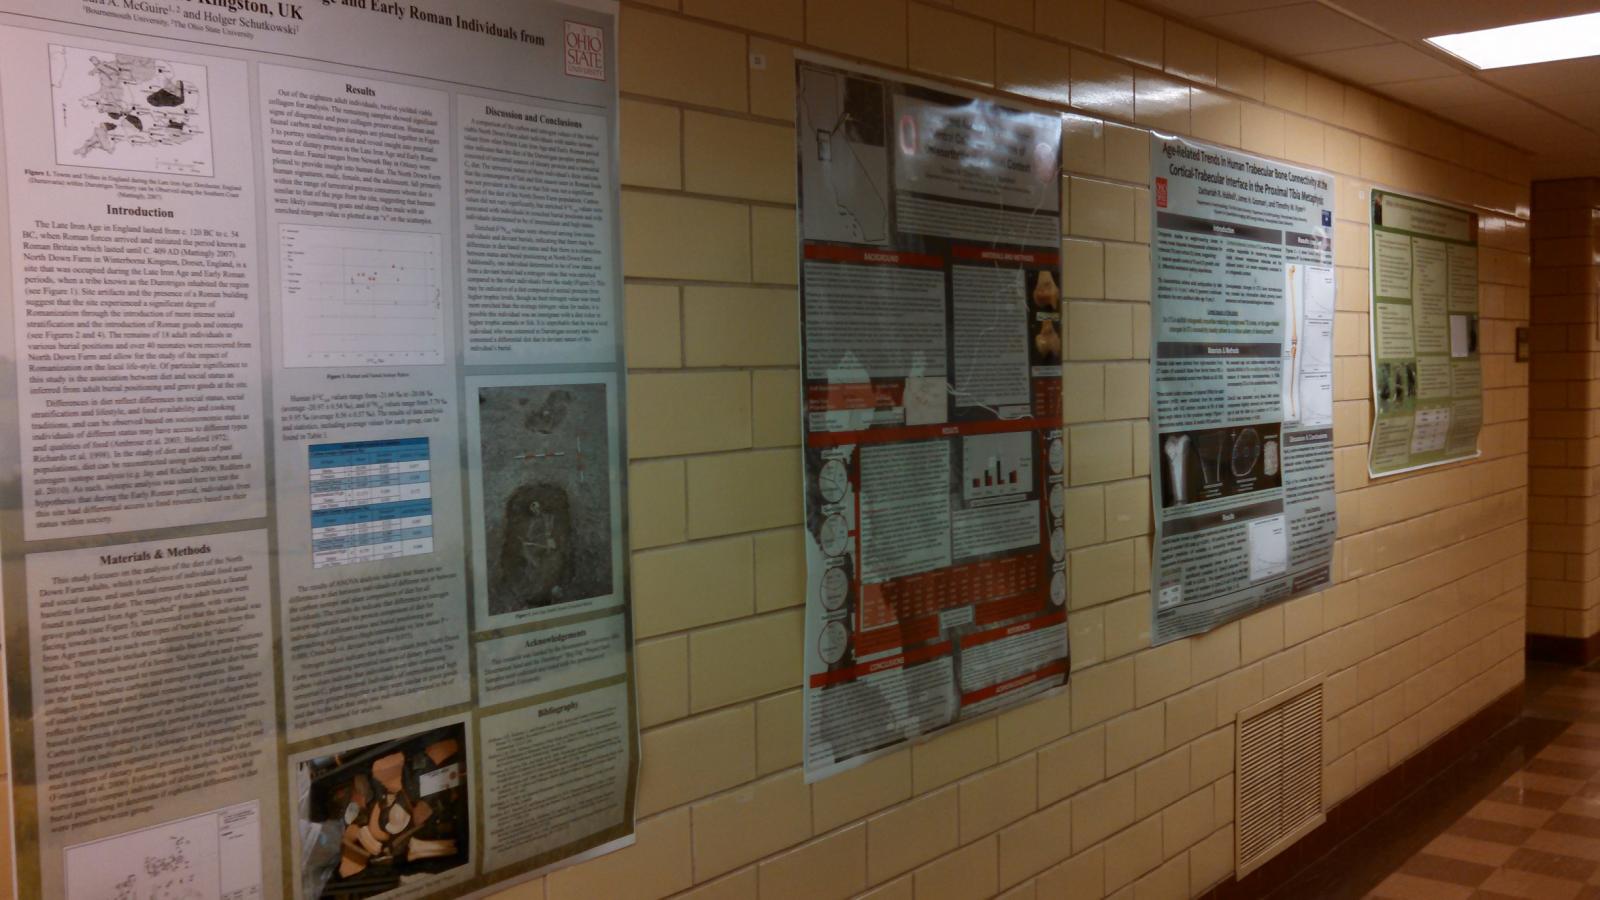 Some of the posters from the 2015 Year In Anthropology symposium